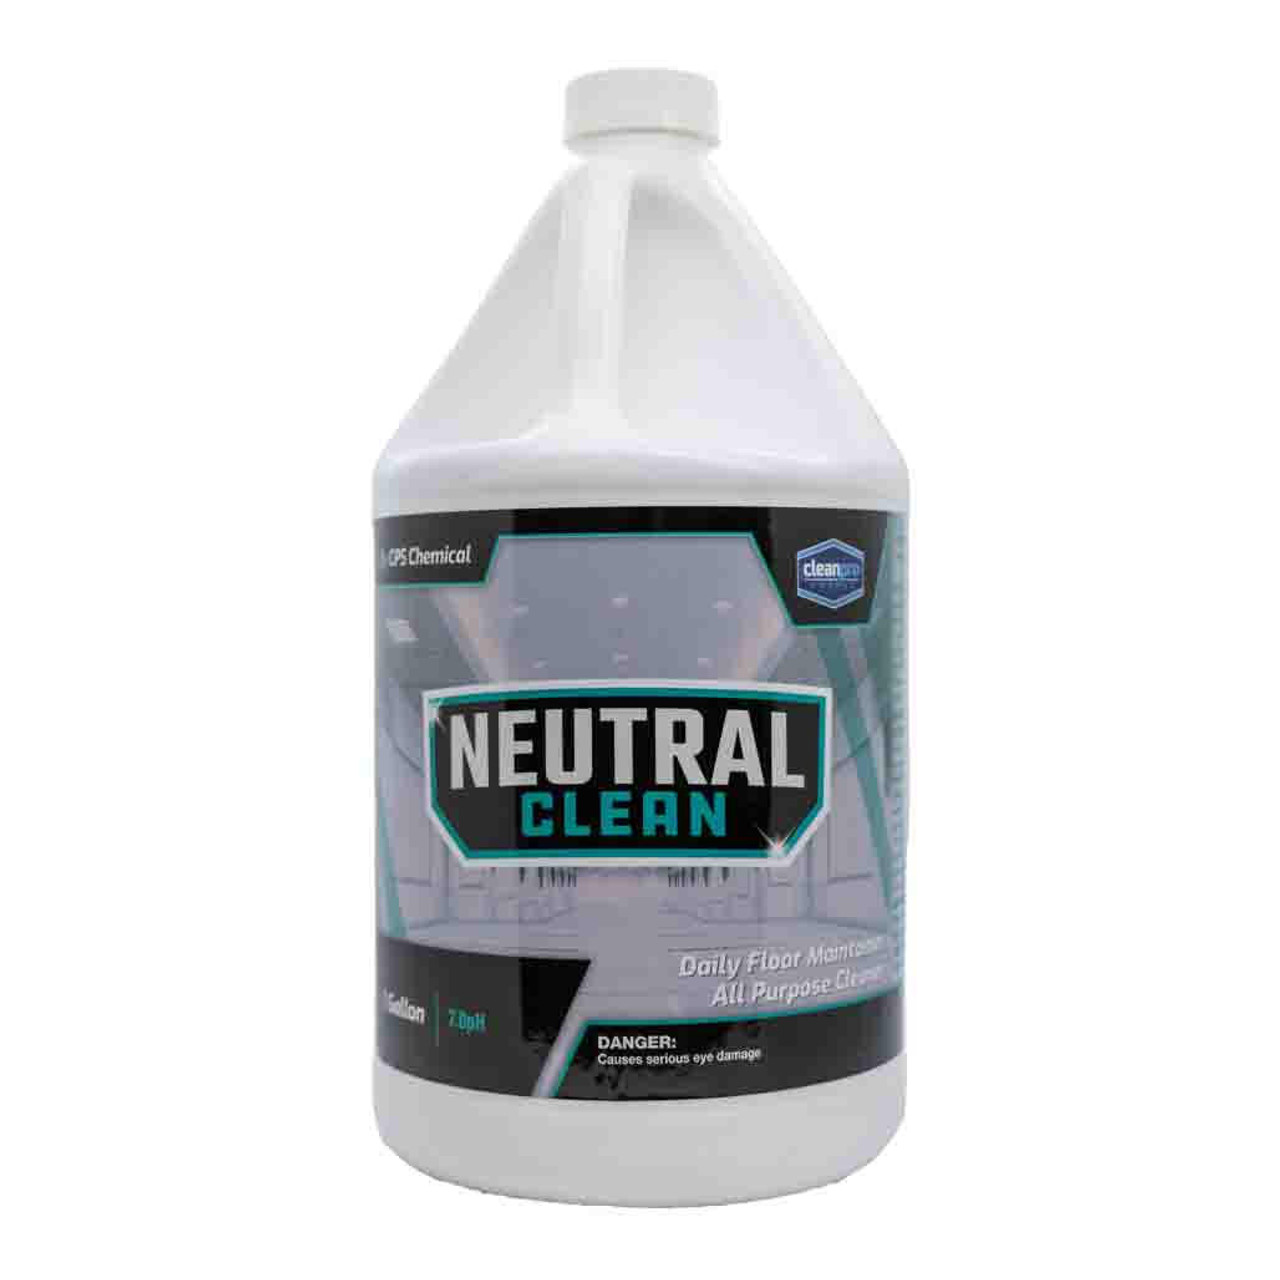 https://cdn11.bigcommerce.com/s-ez56cx3fuk/images/stencil/1280x1280/products/2446/5715/cleanpro-chemical-cps-neutral-clean-concentrated-hard-surface-and-epoxy-floor-cleaner-1-gallon__87019.1660040971.jpg?c=2